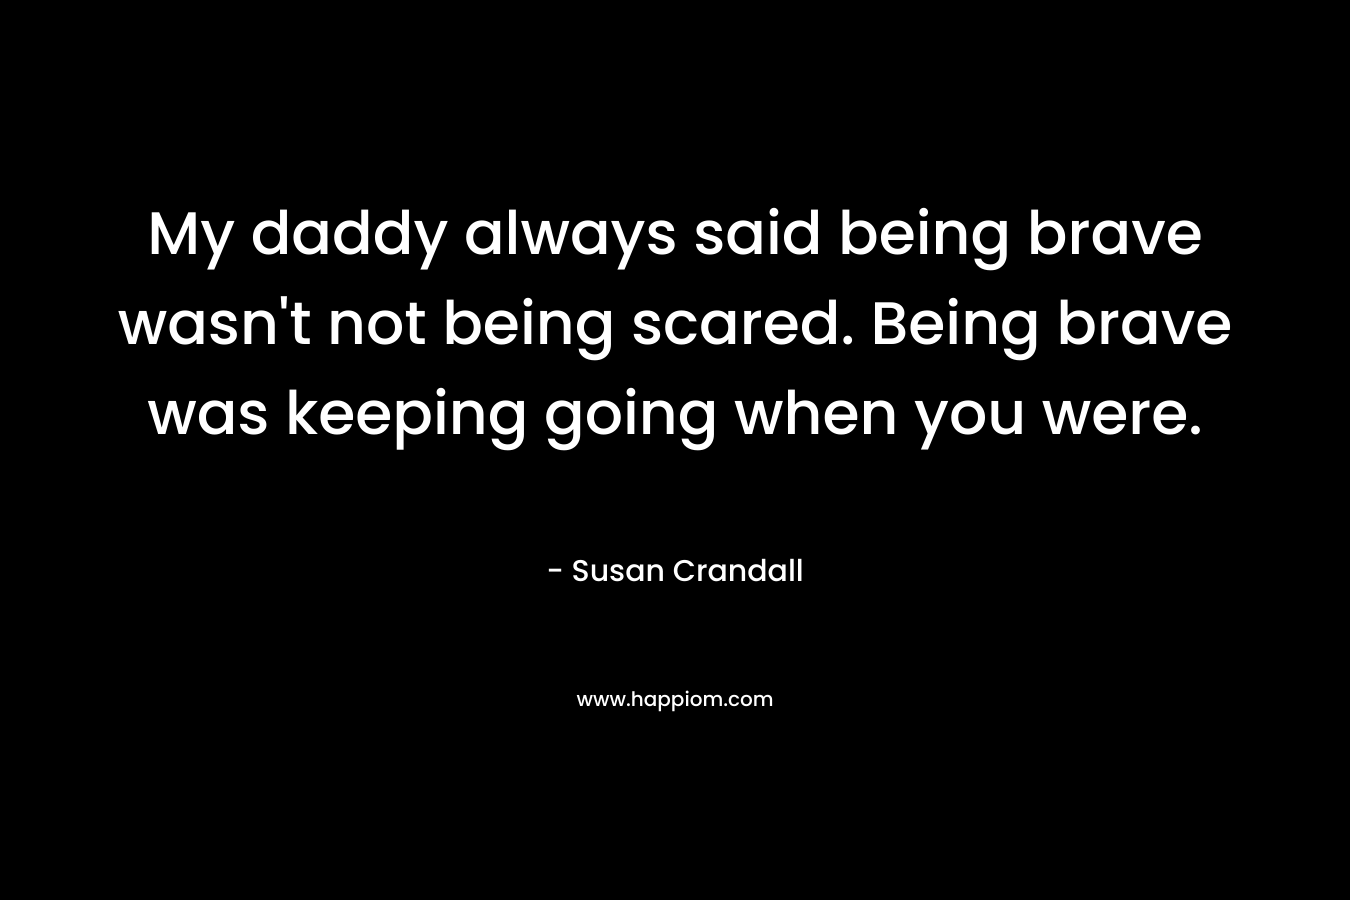 My daddy always said being brave wasn't not being scared. Being brave was keeping going when you were.